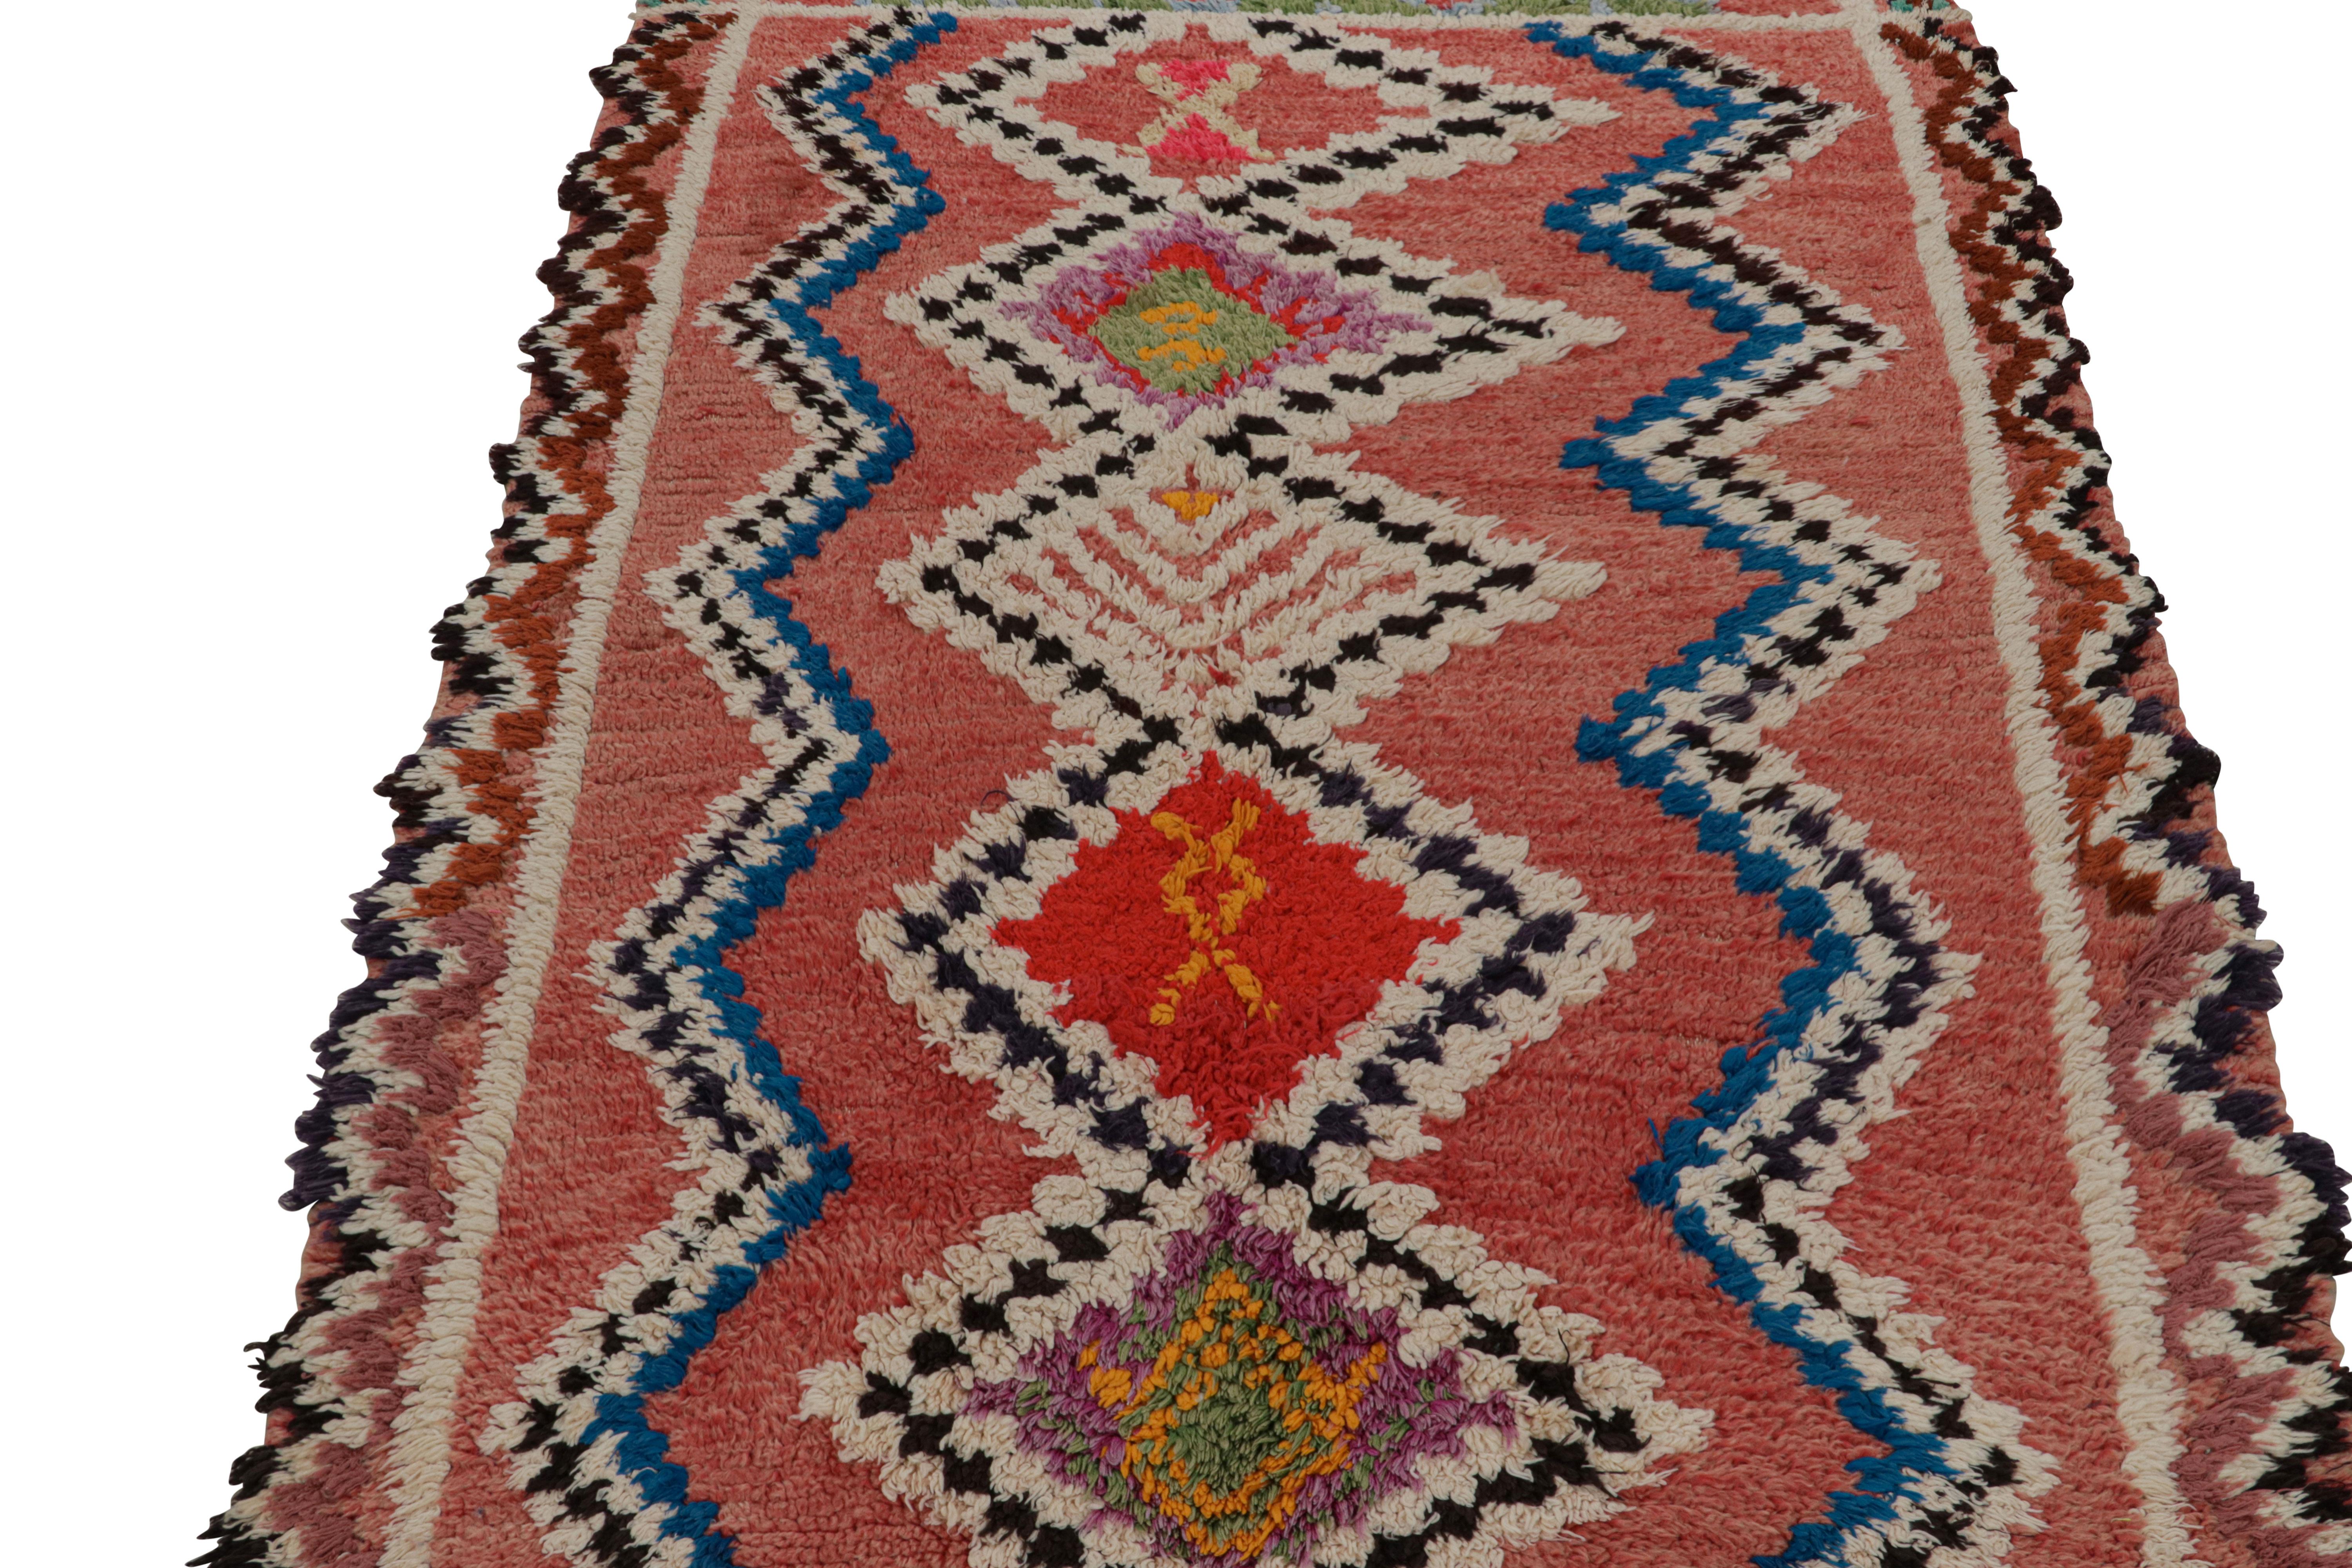 Hand-Knotted Vintage Moroccan Rug in Salmon Red with Geometric Patterns, from Rug & Kilim  For Sale